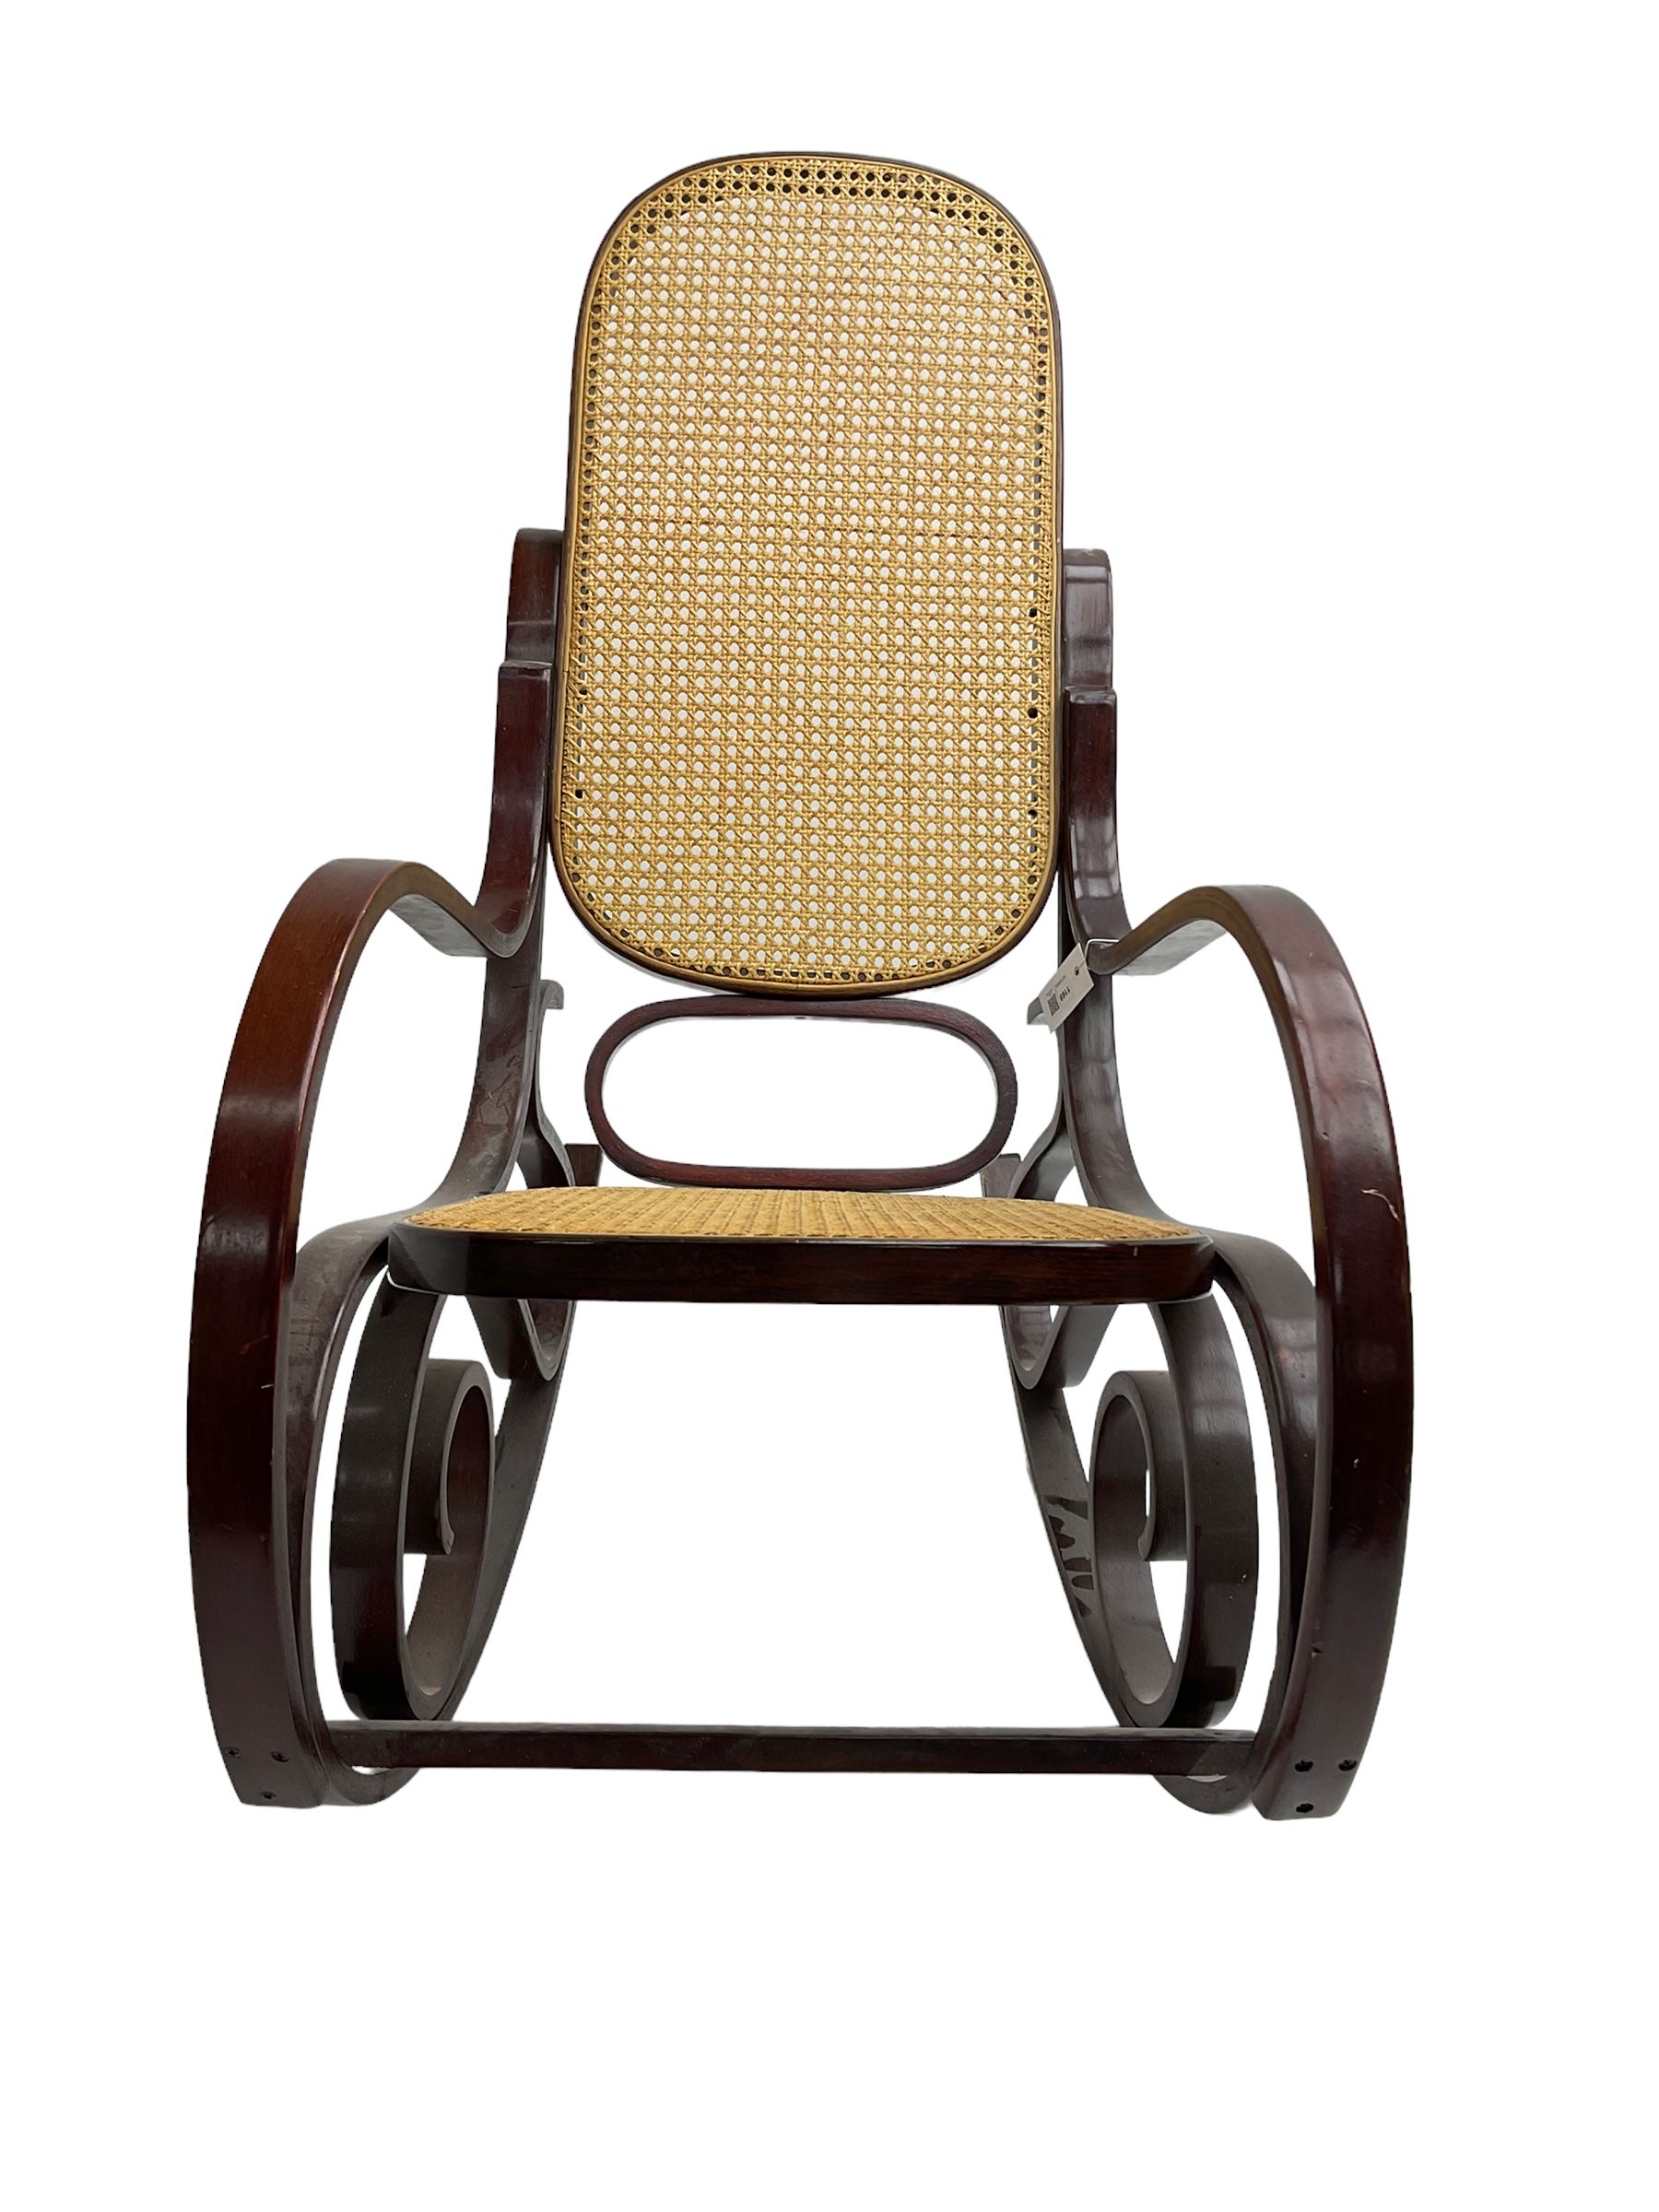 Thonet style rocking armchair - Image 3 of 5